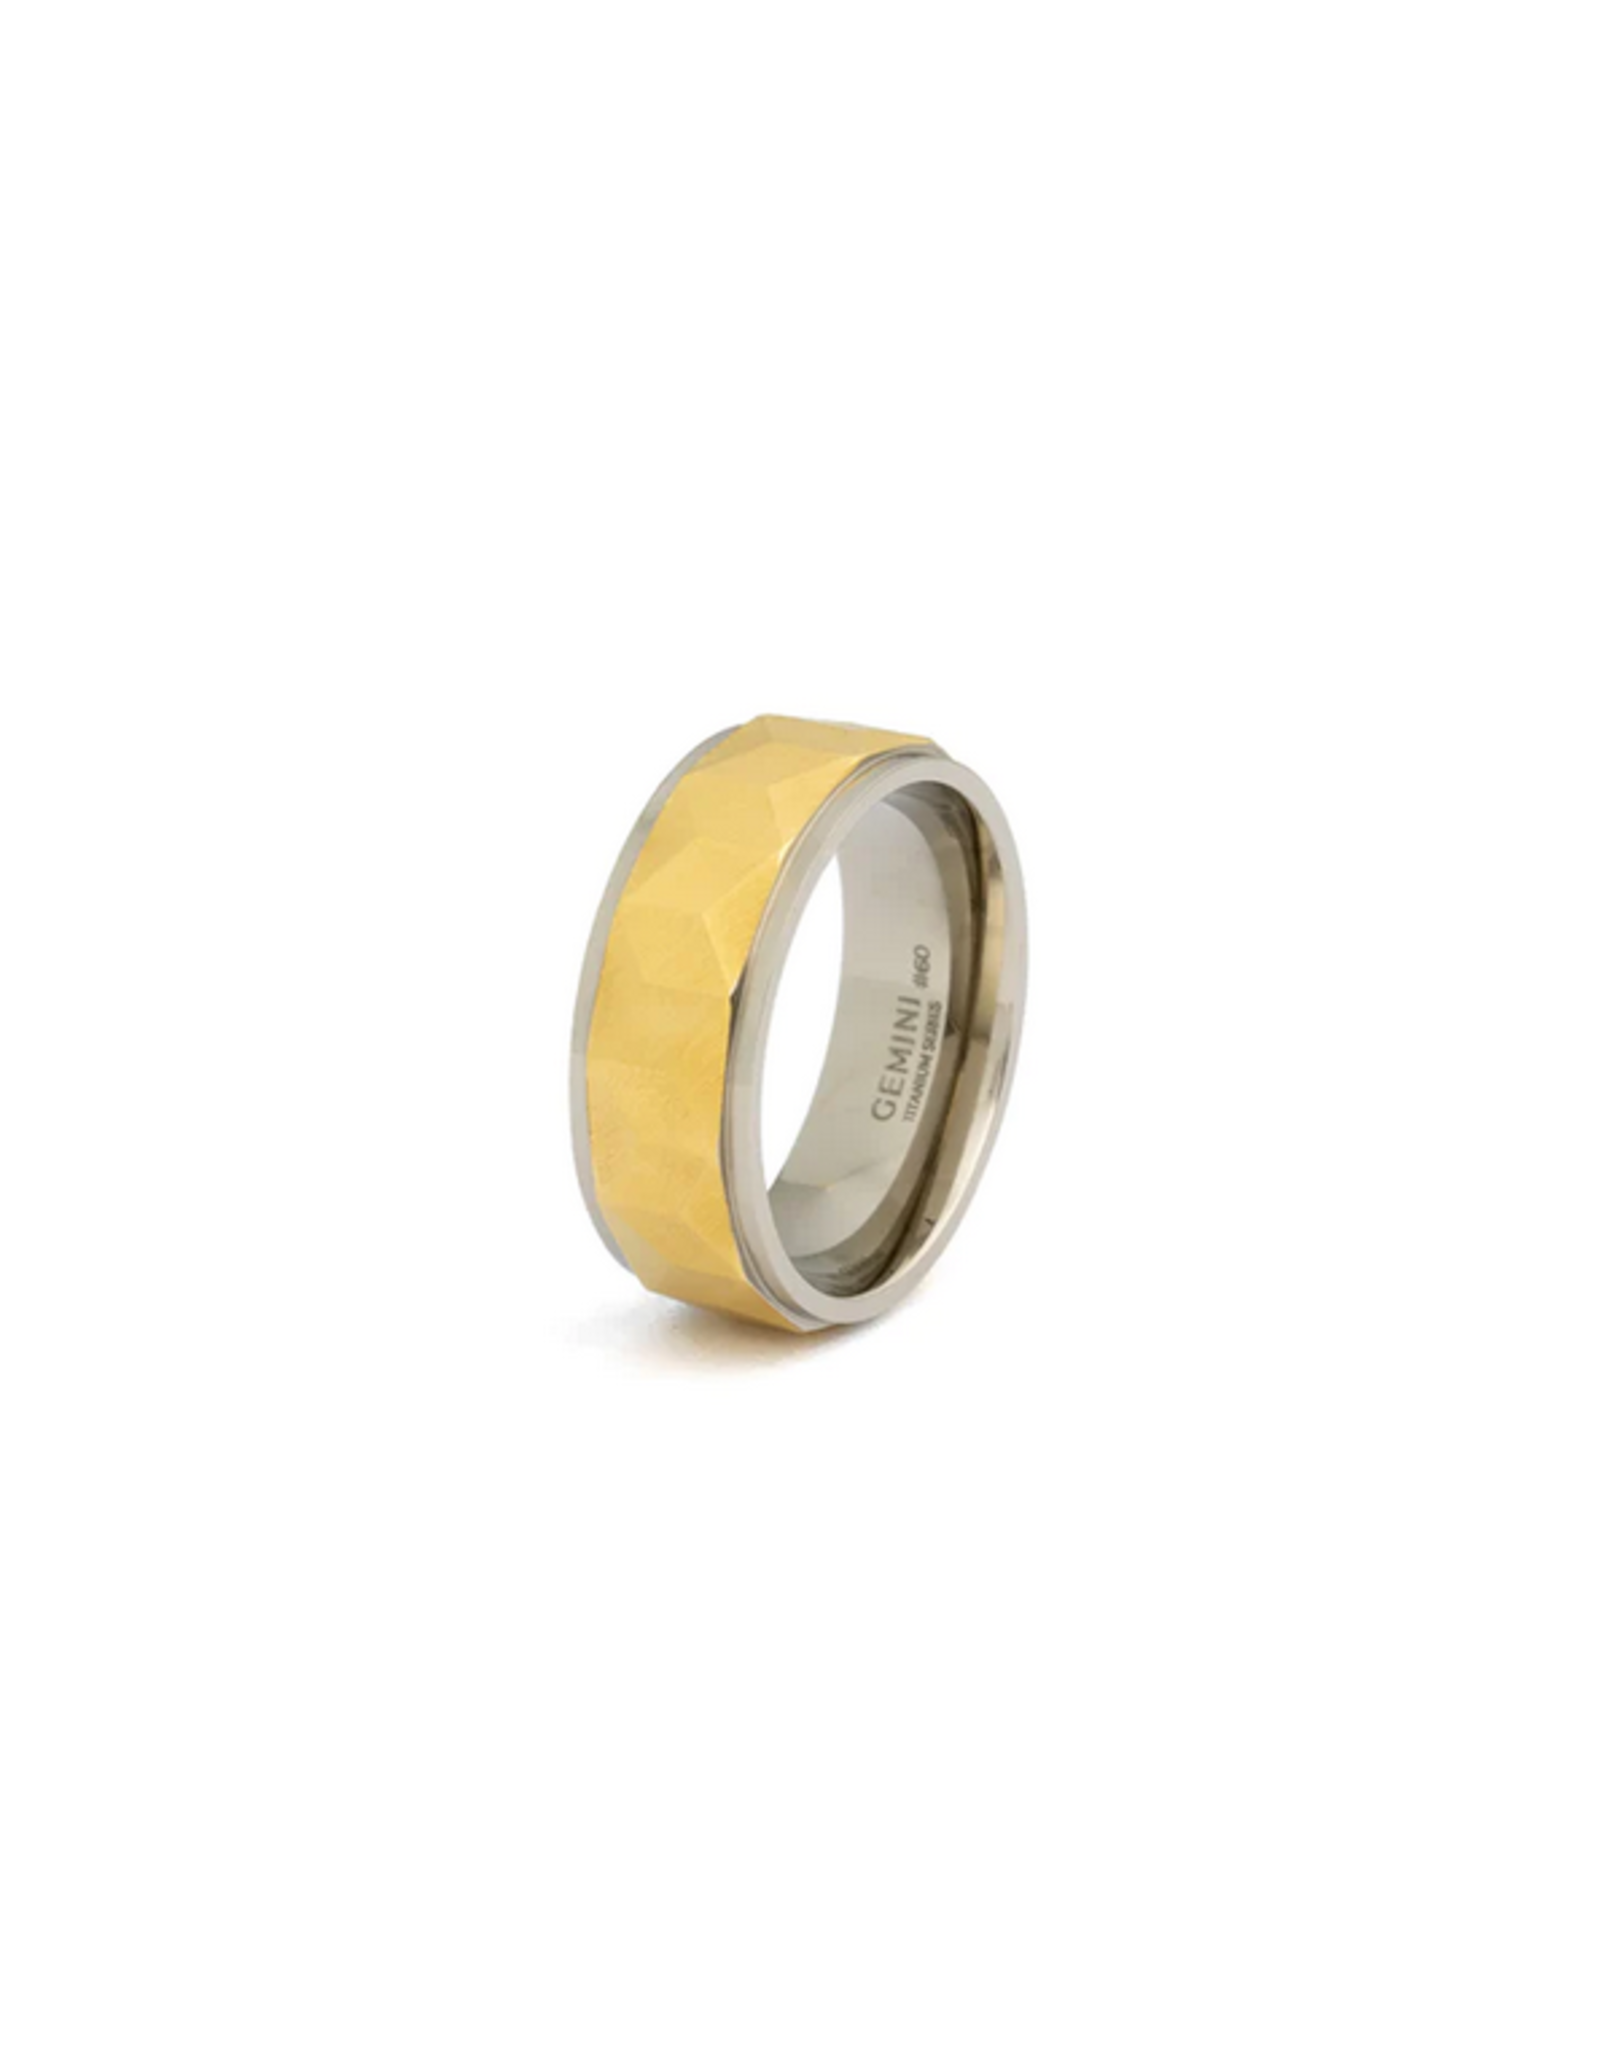 gemini-silver-and-gold-timor-ring